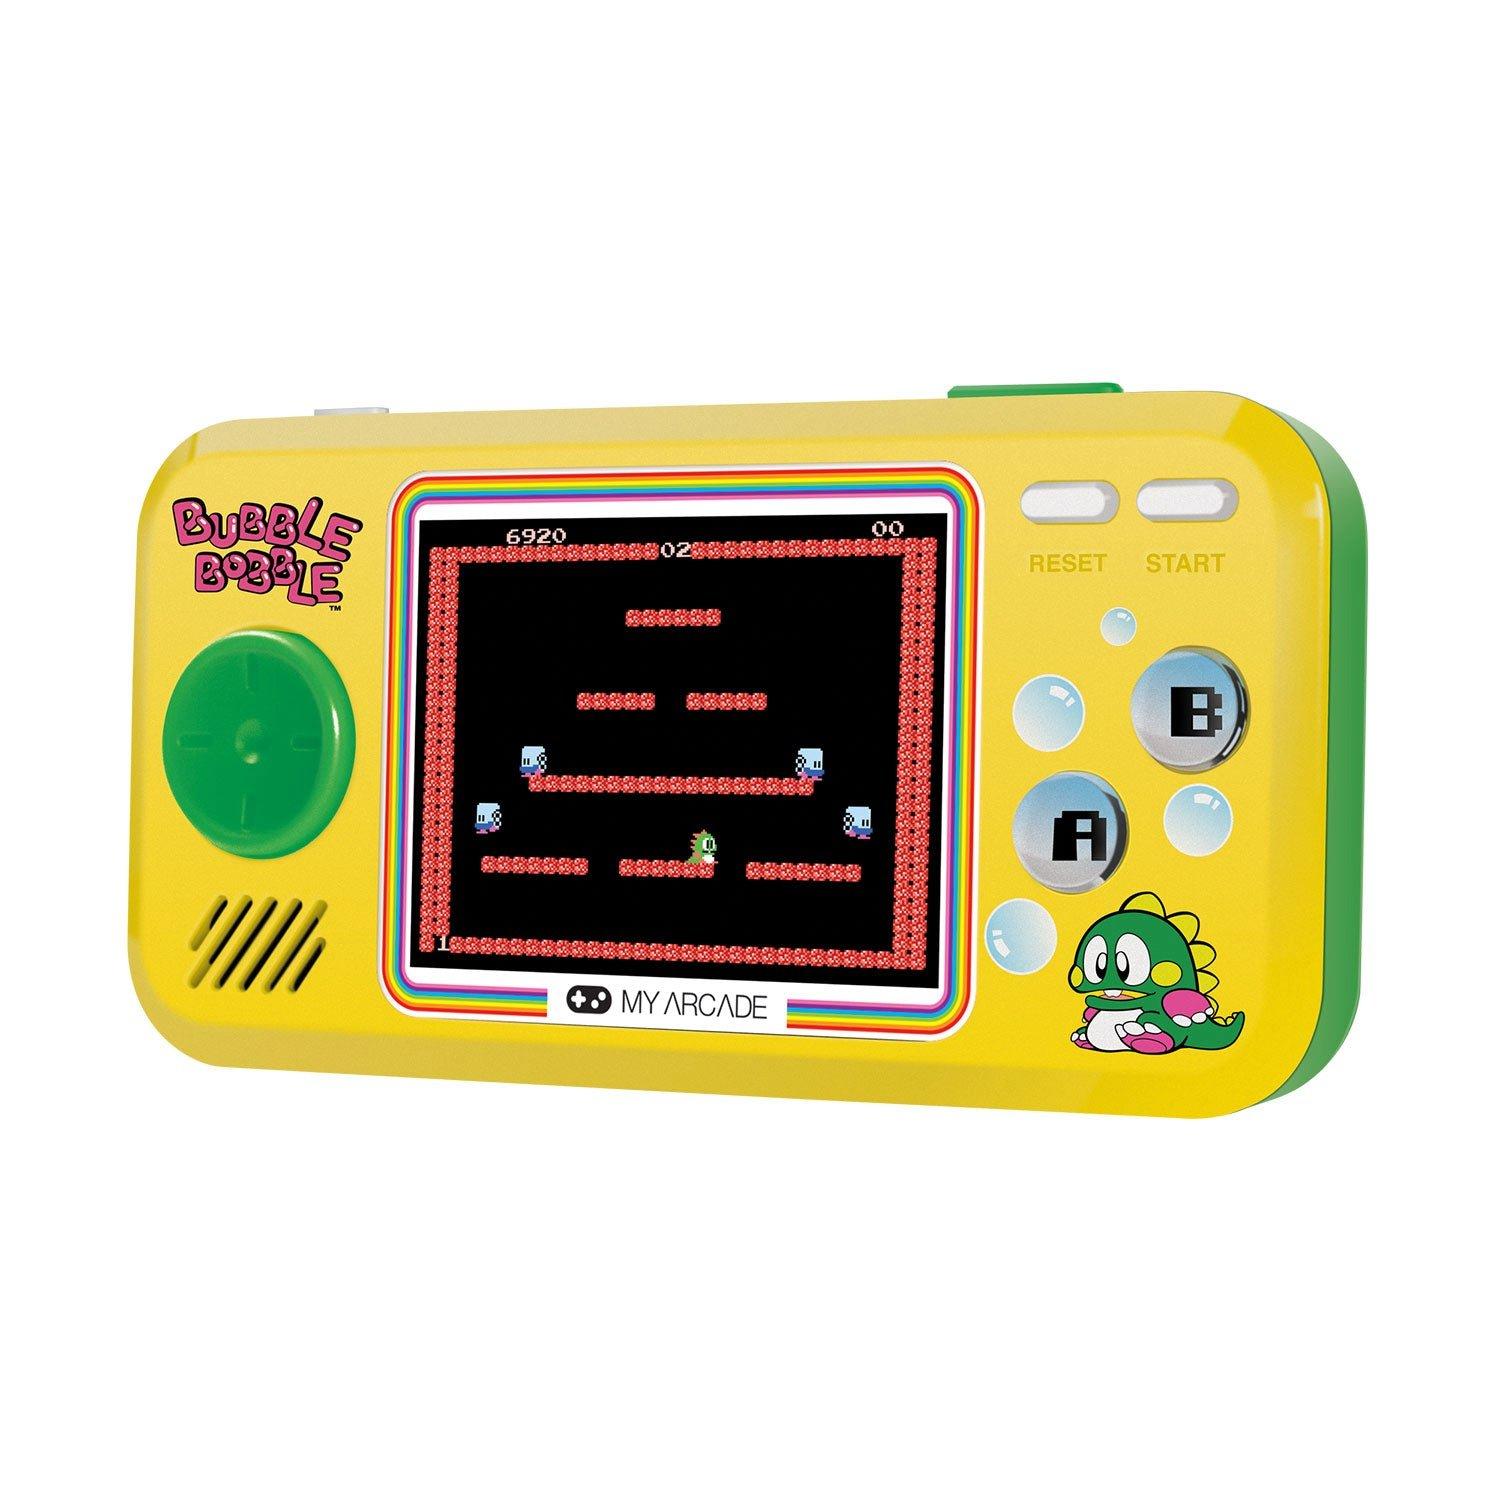 Bubble Bobble Pocket Player Portable Gaming System (3 Games In 1)